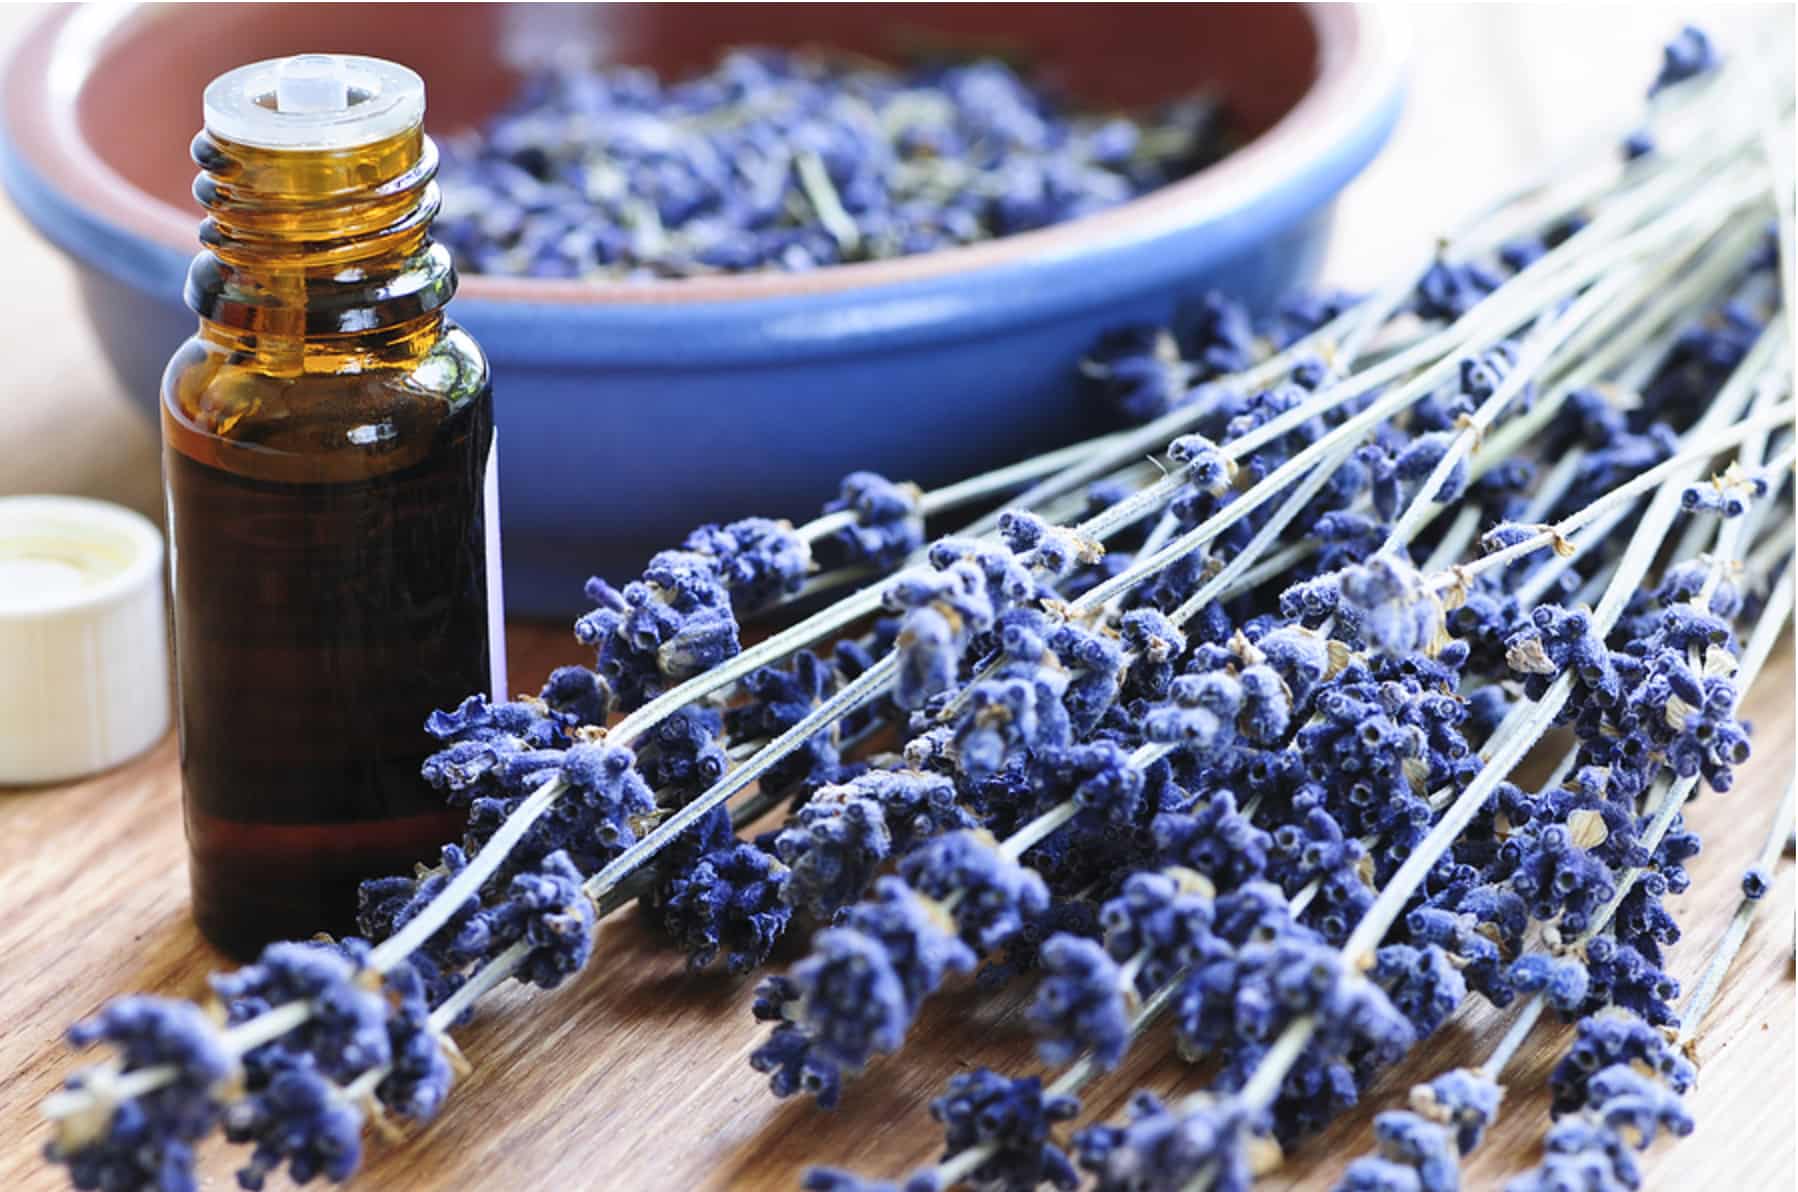 Lavender's pleasant aroma has been shown to have mood-enhancing properties, helping to alleviate anxiety and uplift the spirit. Additionally, it can be used topically to soothe minor skin irritations, such as insect bites or burns. Having lavender on hand ensures you have a natural remedy for relaxation, emotional well-being, and minor skin issues, making it a must-have herb in your medicinal arsenal.